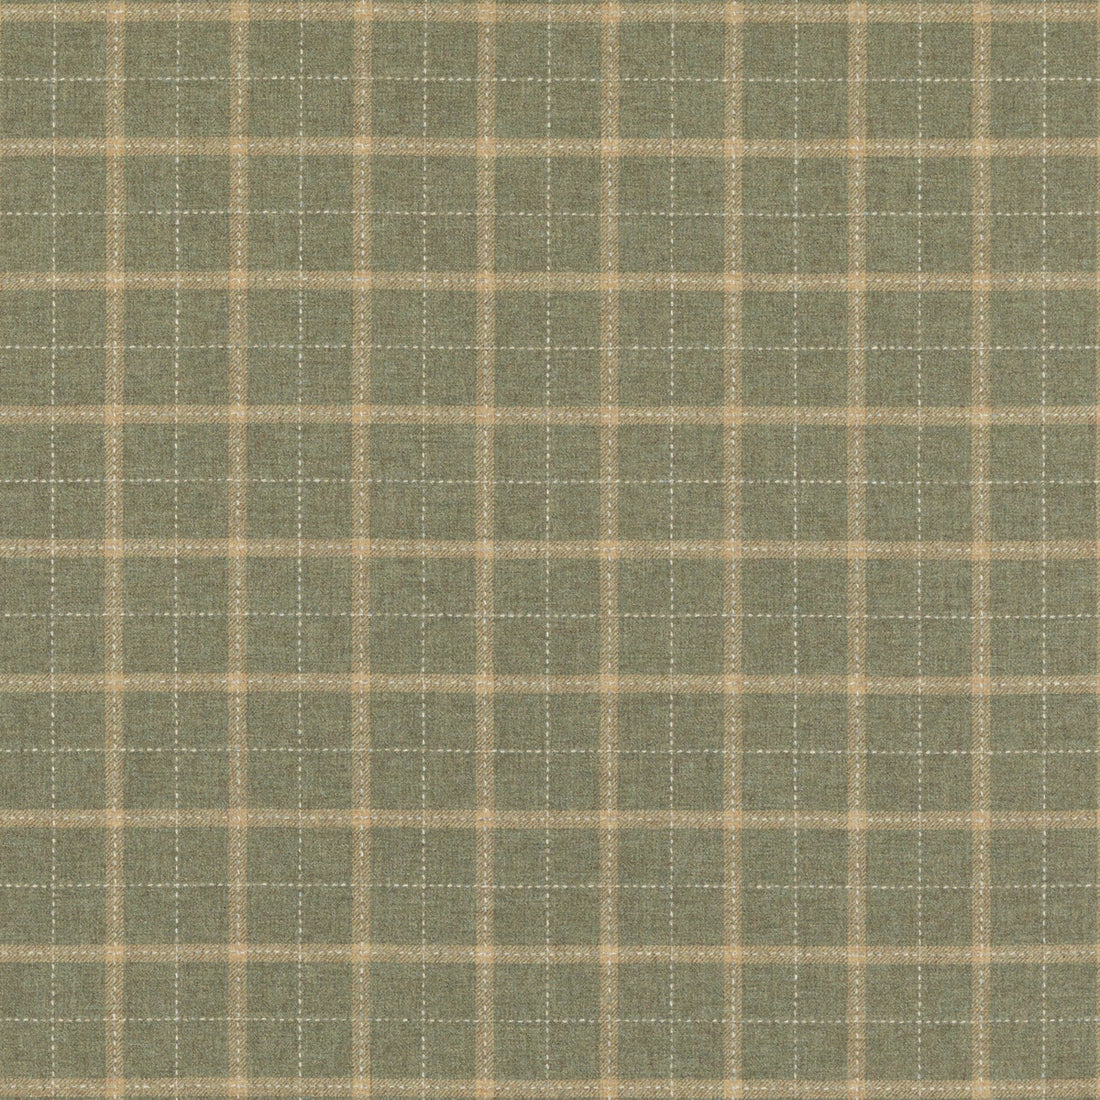 Bowmont fabric in lovat color - pattern FD806.R106.0 - by Mulberry in the Mulberry Wools III collection